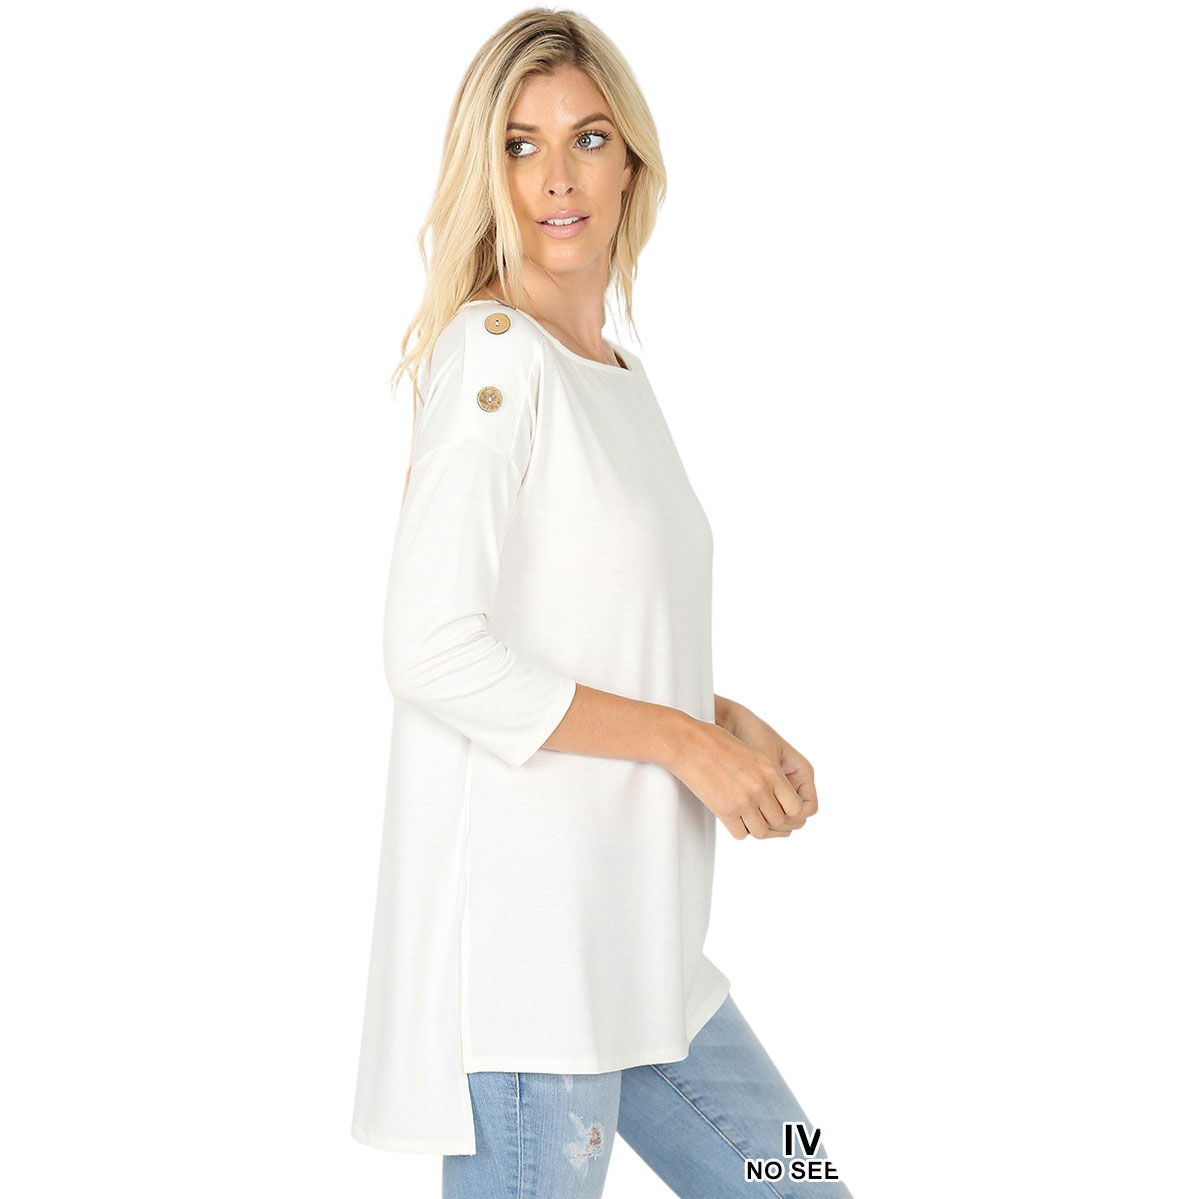 2082 - Boat Neck Hi-Lo Tops w/Wooden Buttons Ivory Boat Neck Hi-Lo Top w/ Wooden Buttons 2082 - 3X